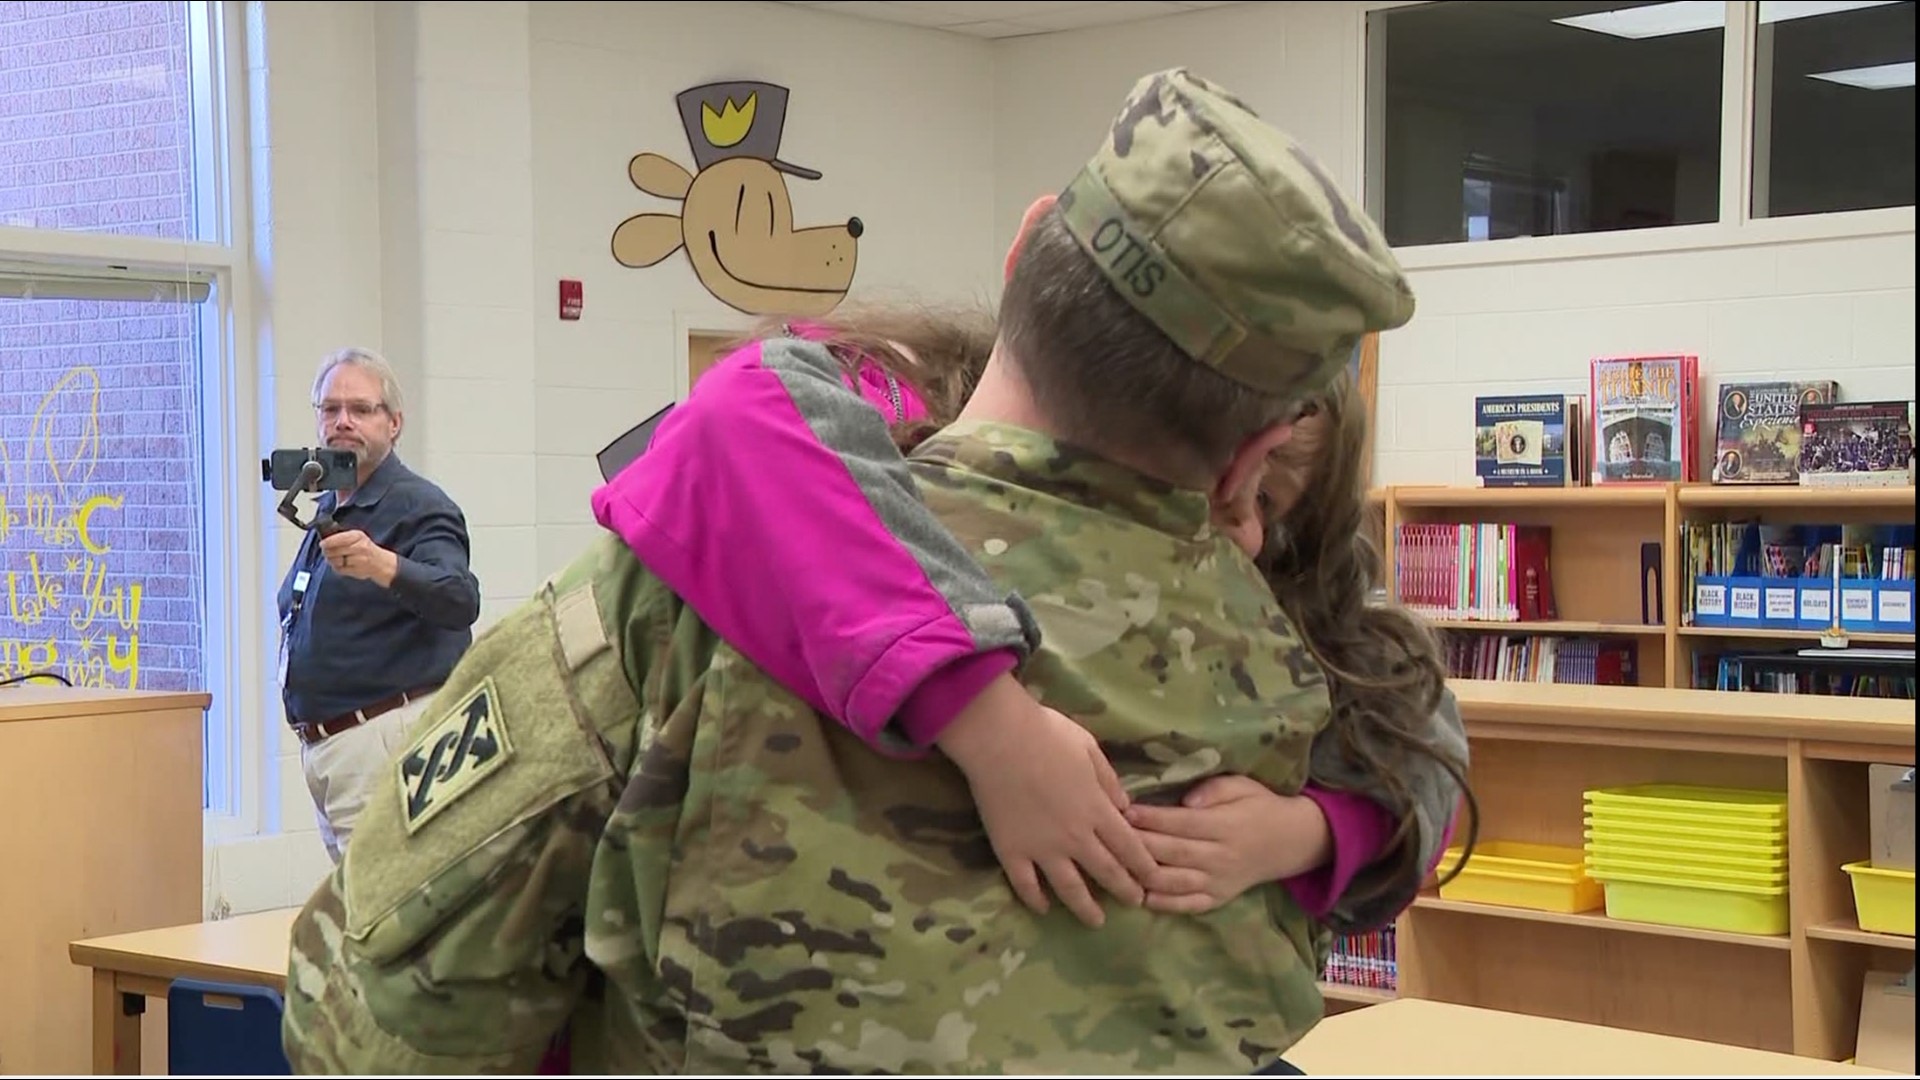 The surprise reunion took place at 8:30 a.m. at Timber Ridge Elementary School.